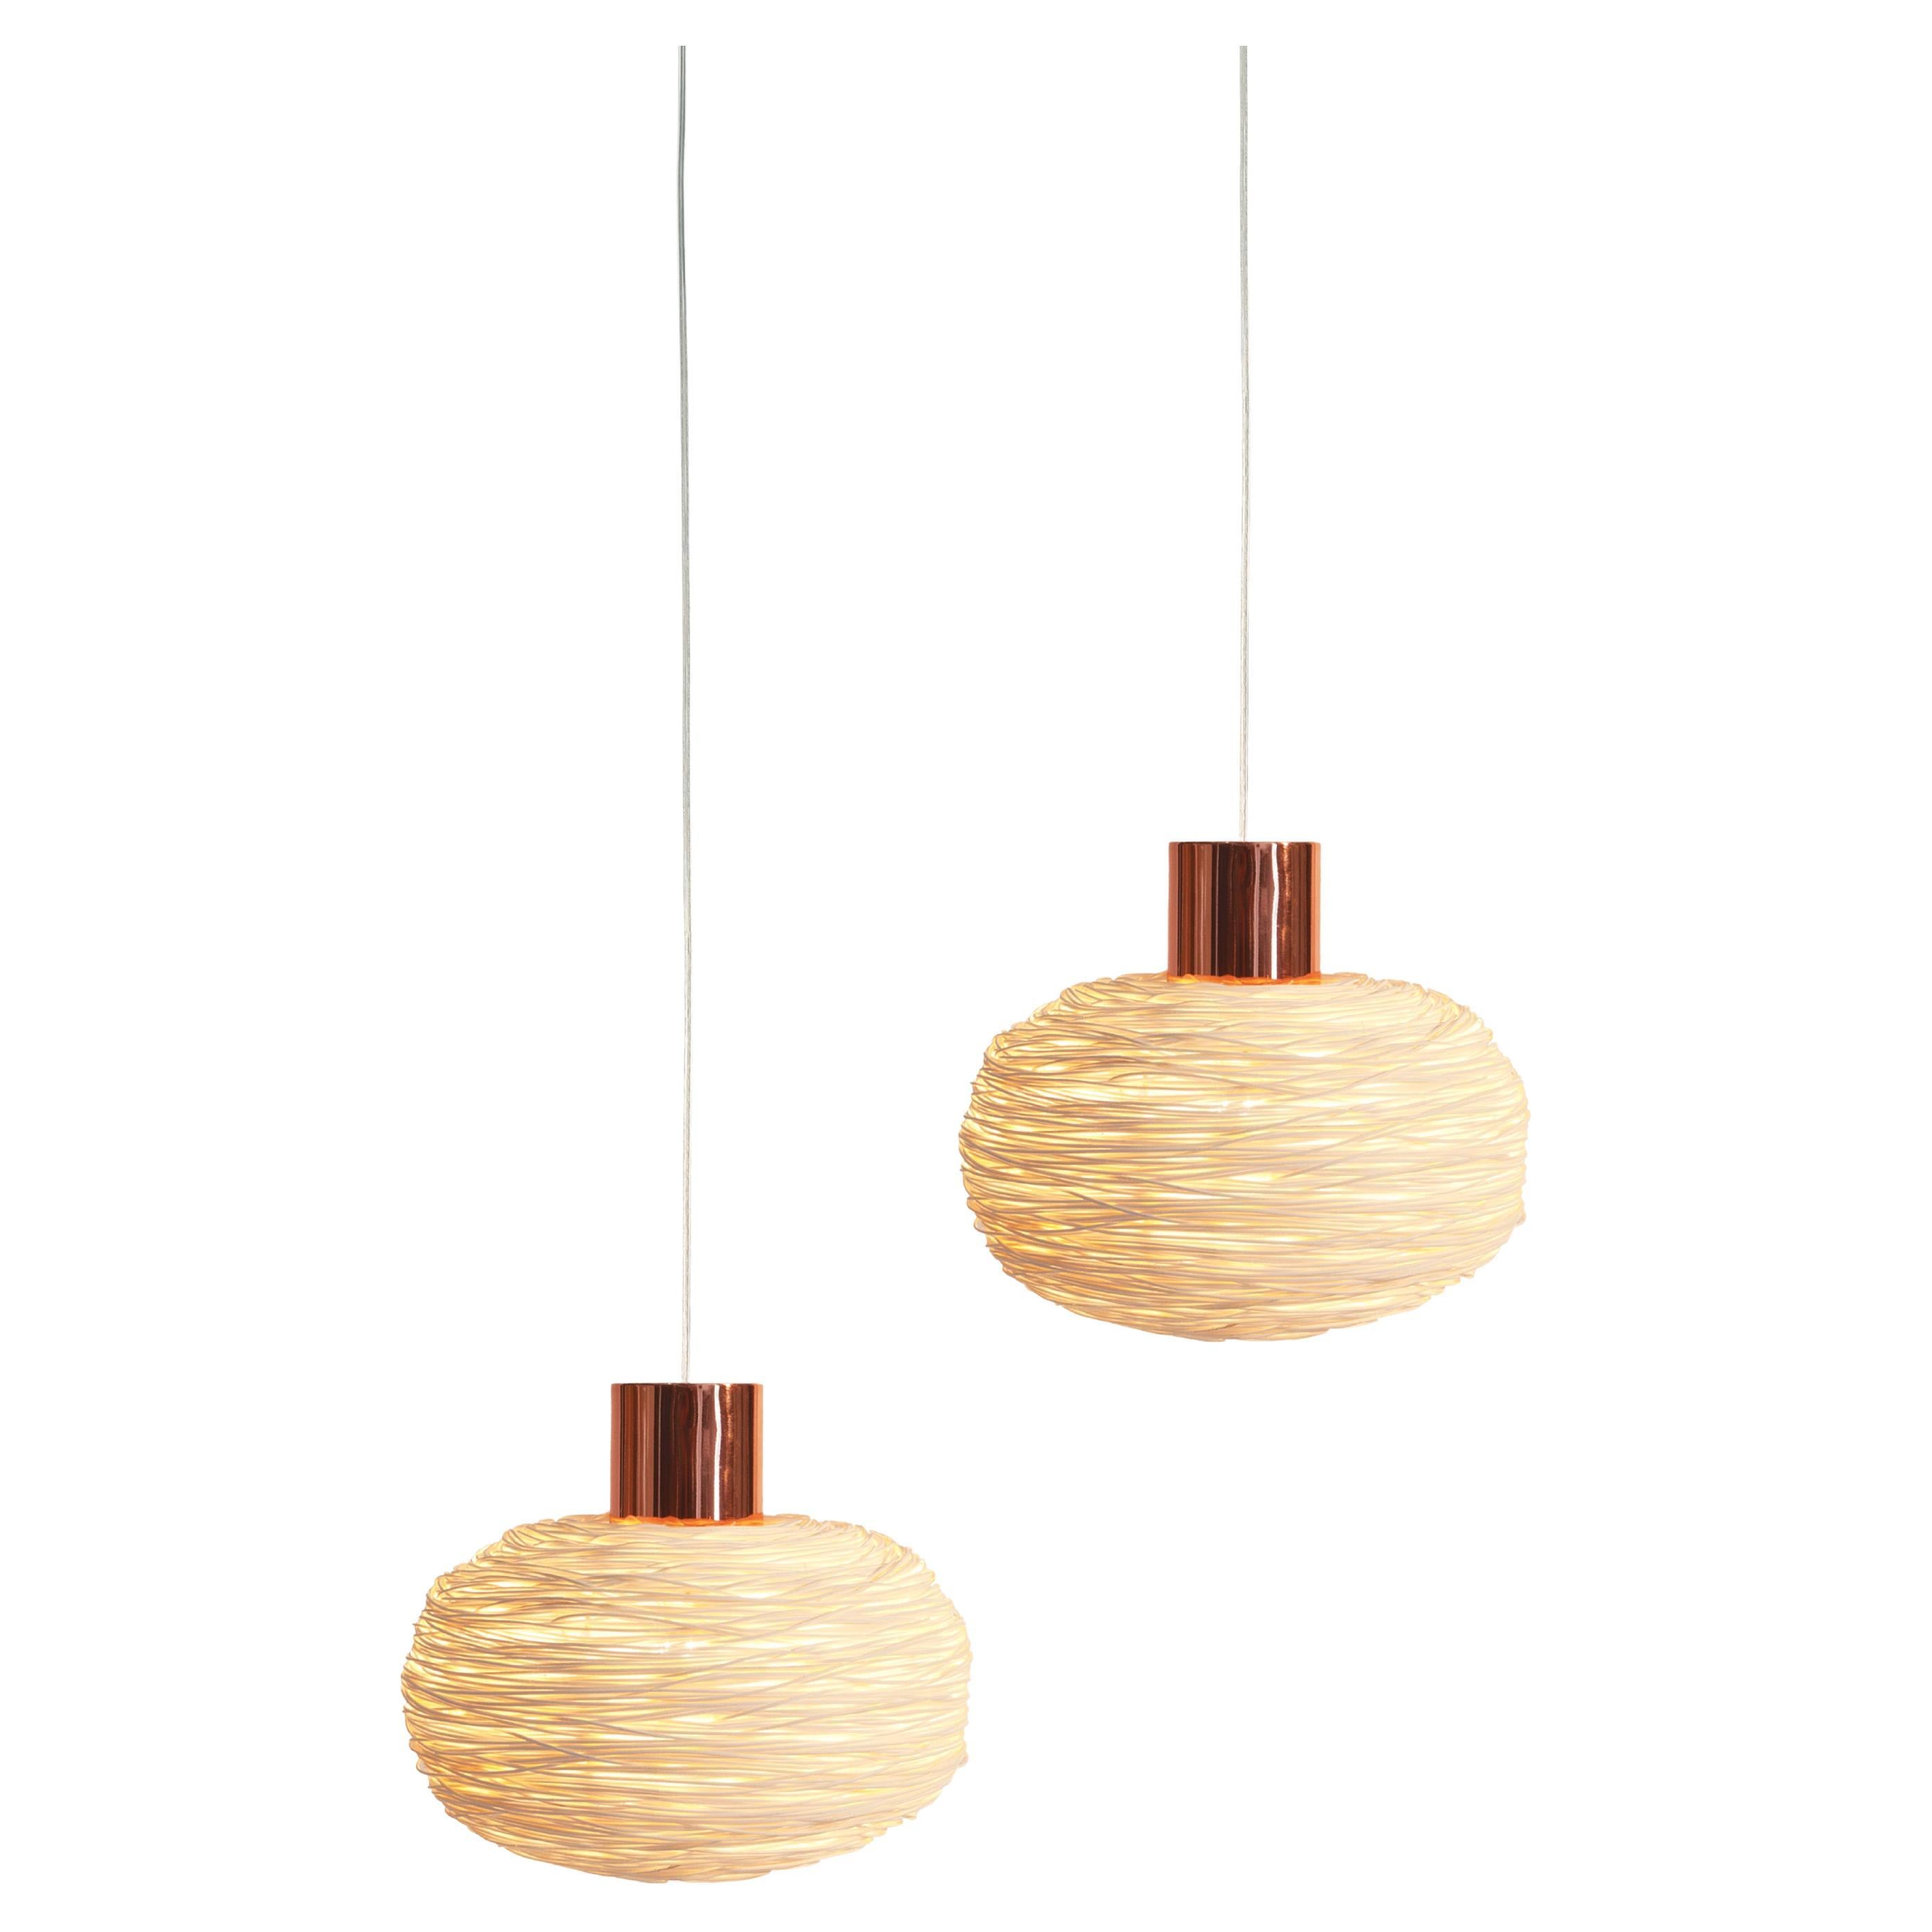 Unit Pendant-R by Ango, Luxuriously stripped down electro native pendant lamp. For Sale